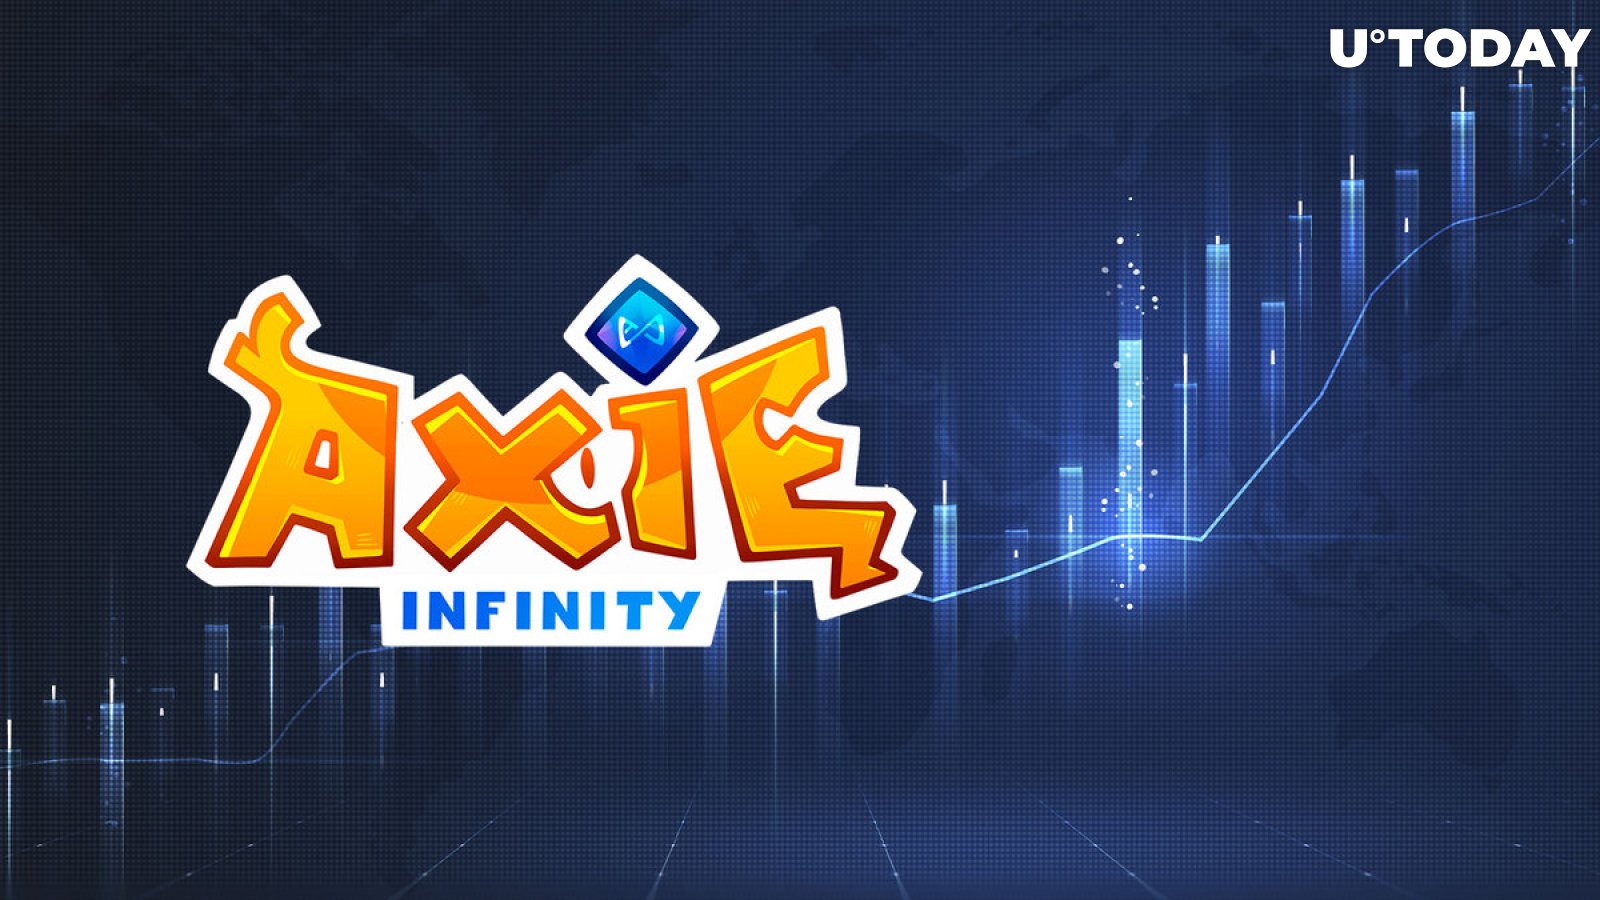 Axie Infinity Suddenly up 25%, What's Happening?